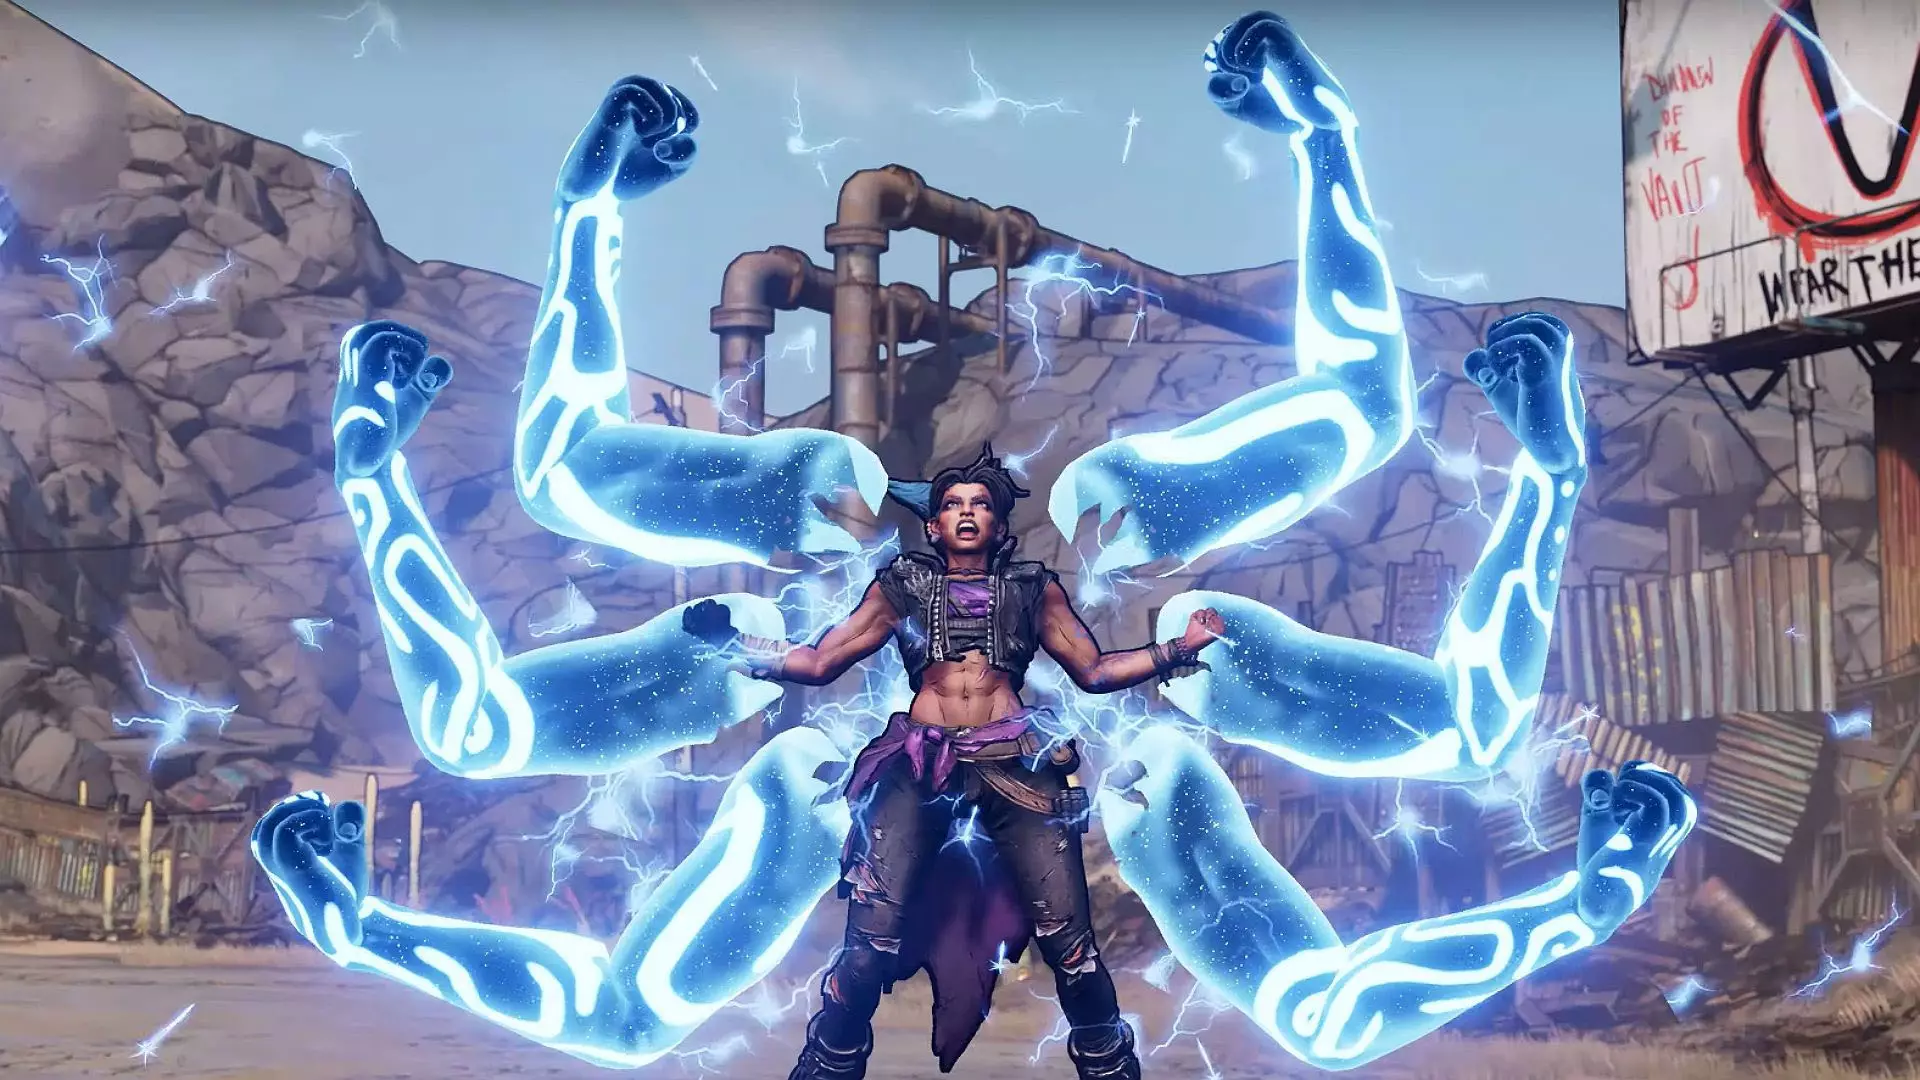 Borderlands 3 takes place years after the last game